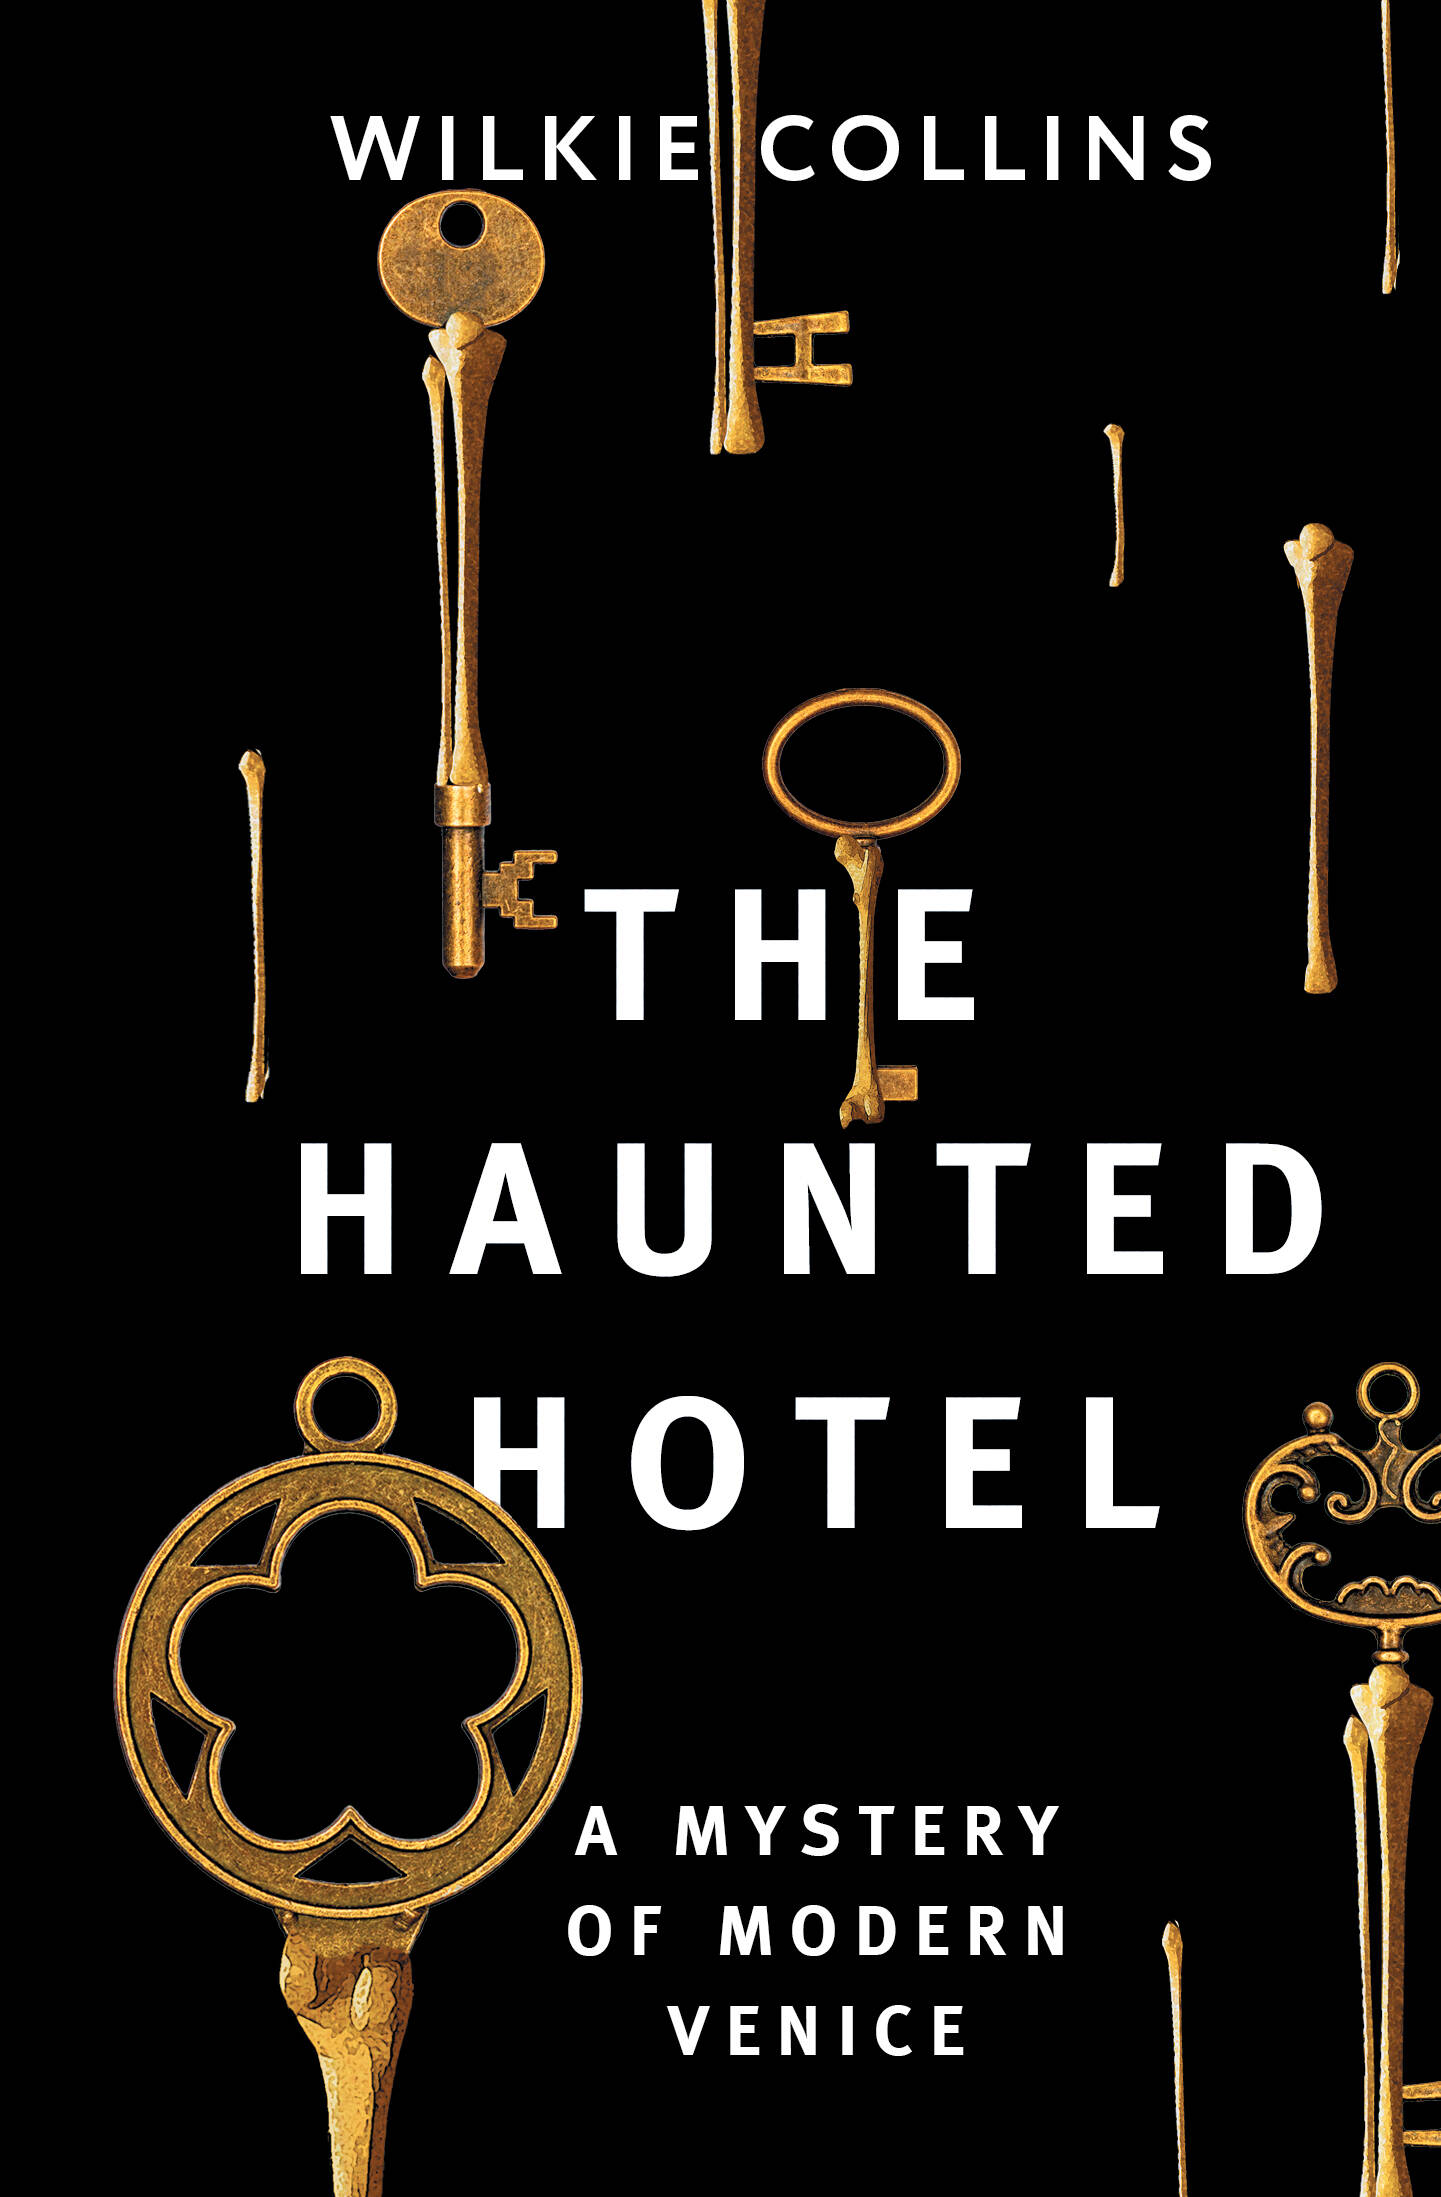 Collins Wilkie The Haunted Hotel: A Mystery of Modern Venice collins wilkie коллинз уильям уилки the haunted hotel